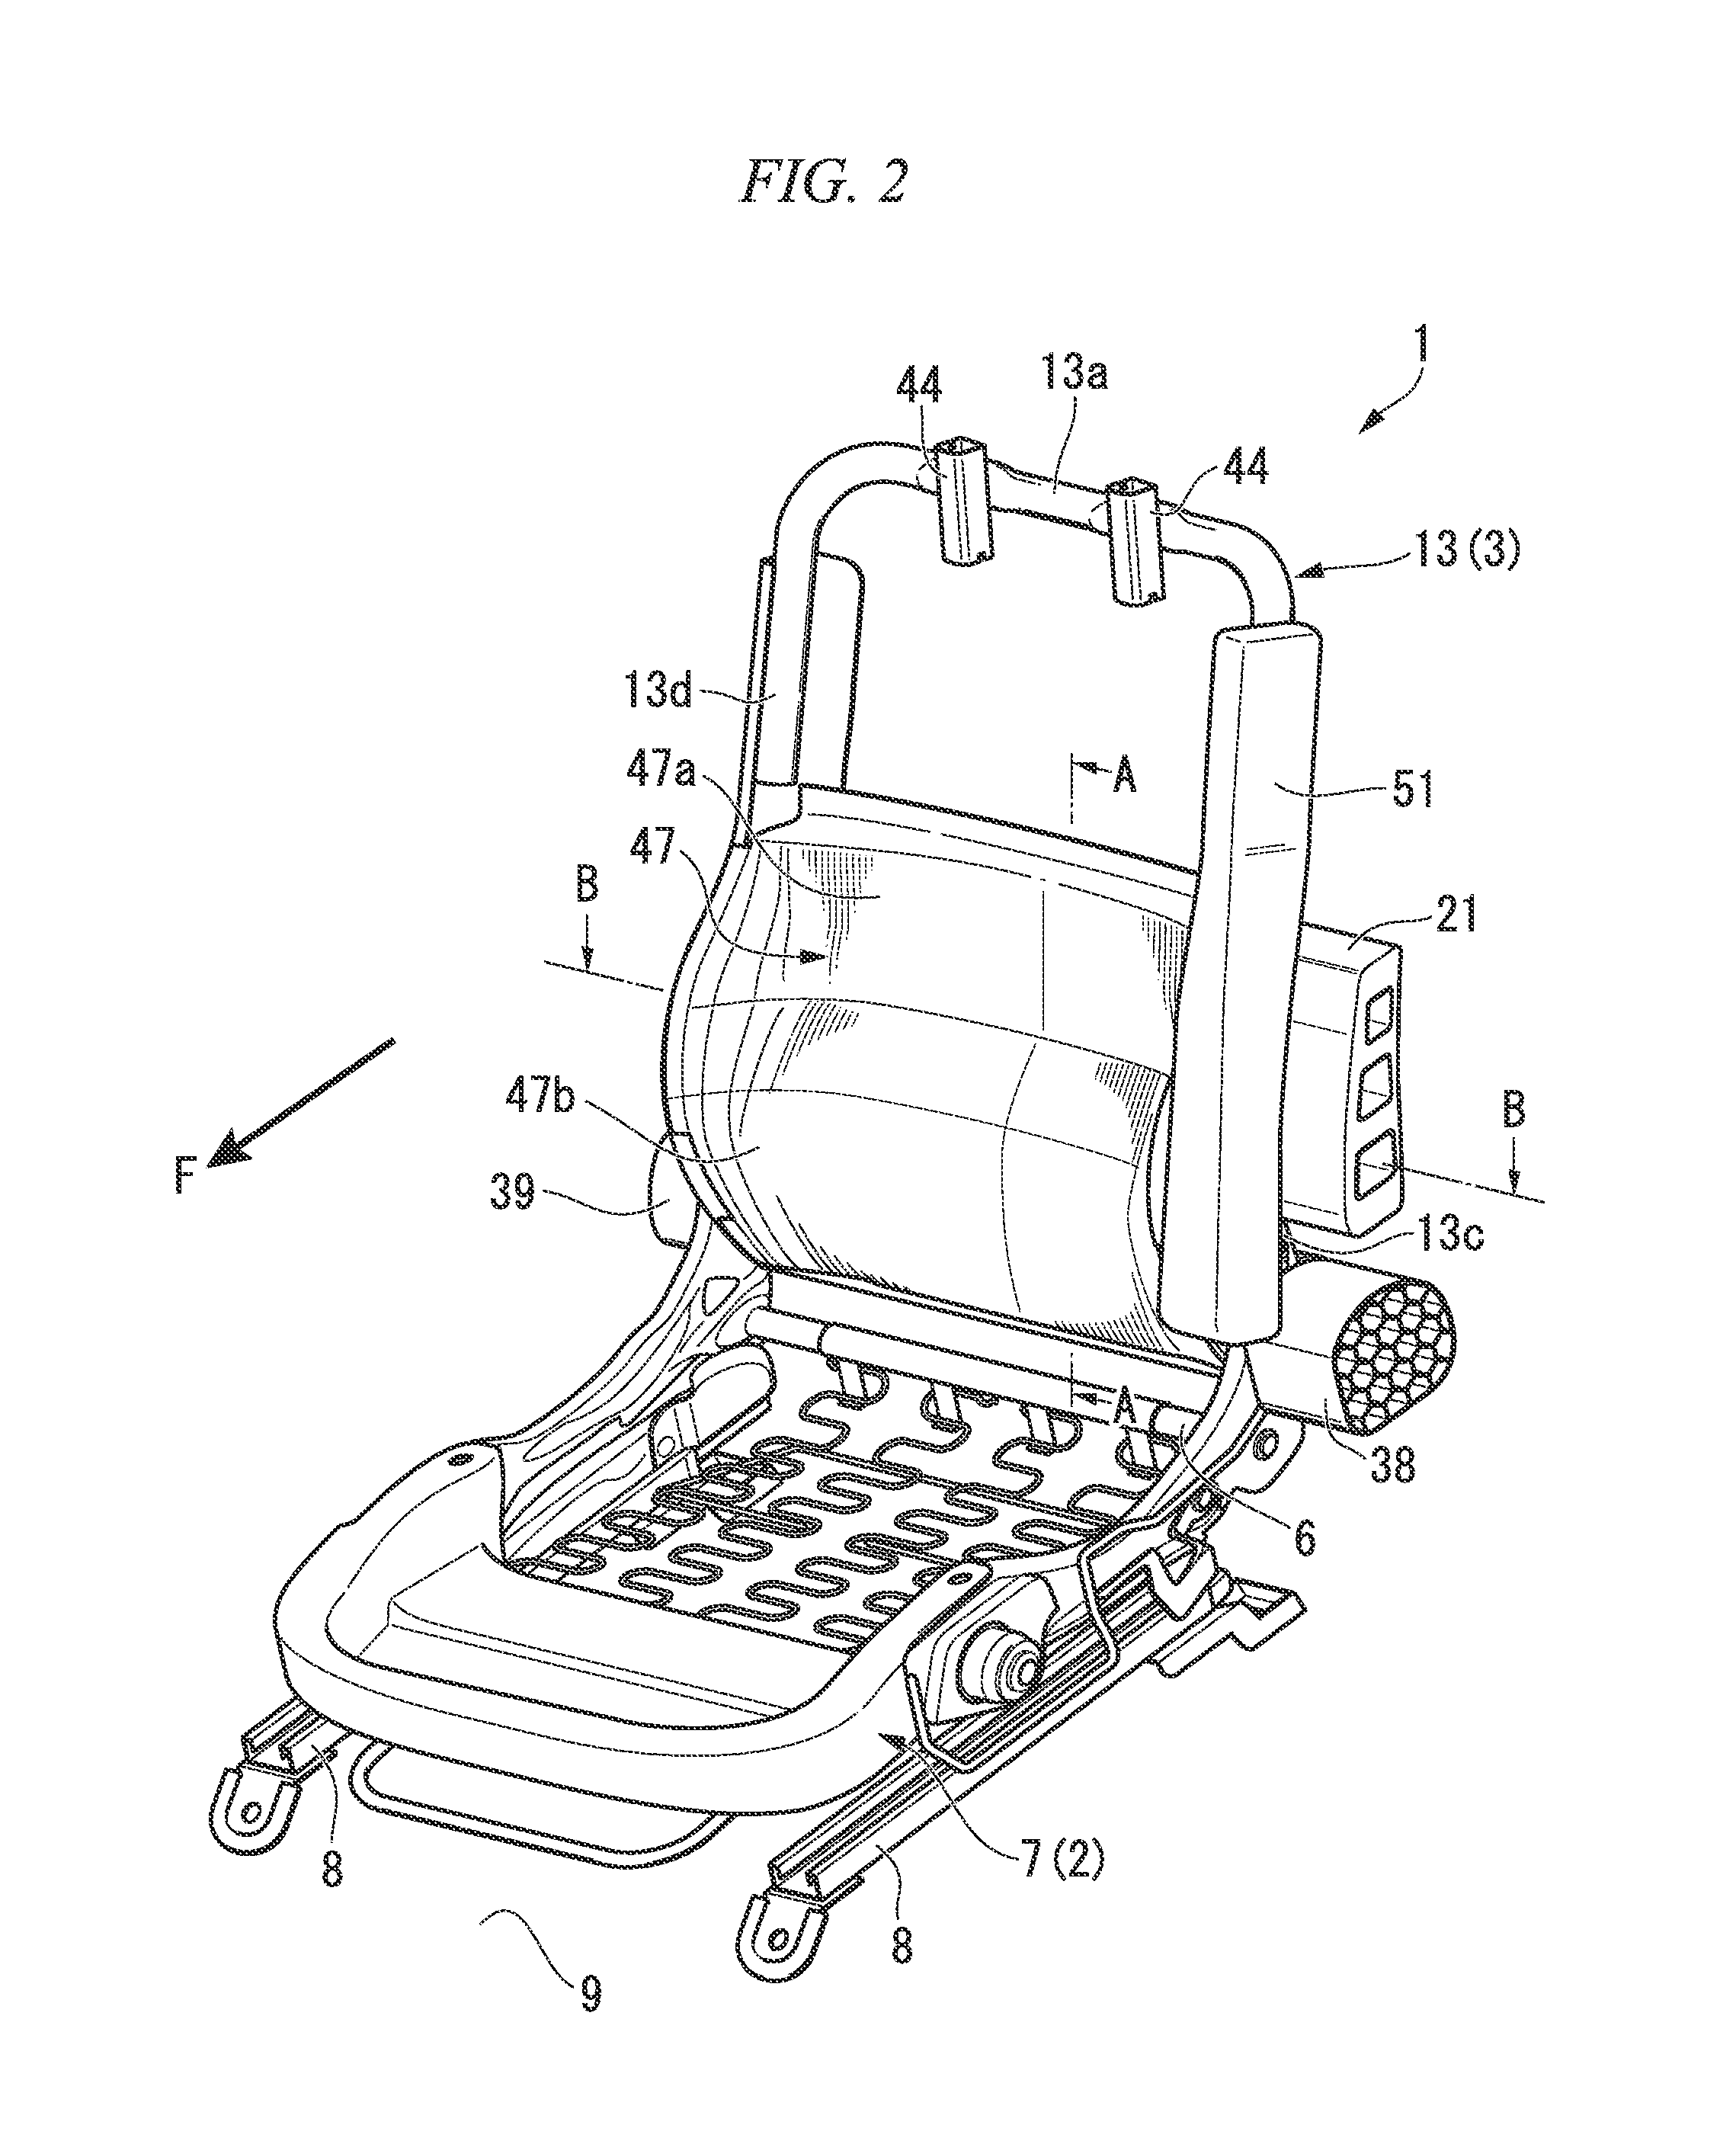 Seat back frame for vehicle seat